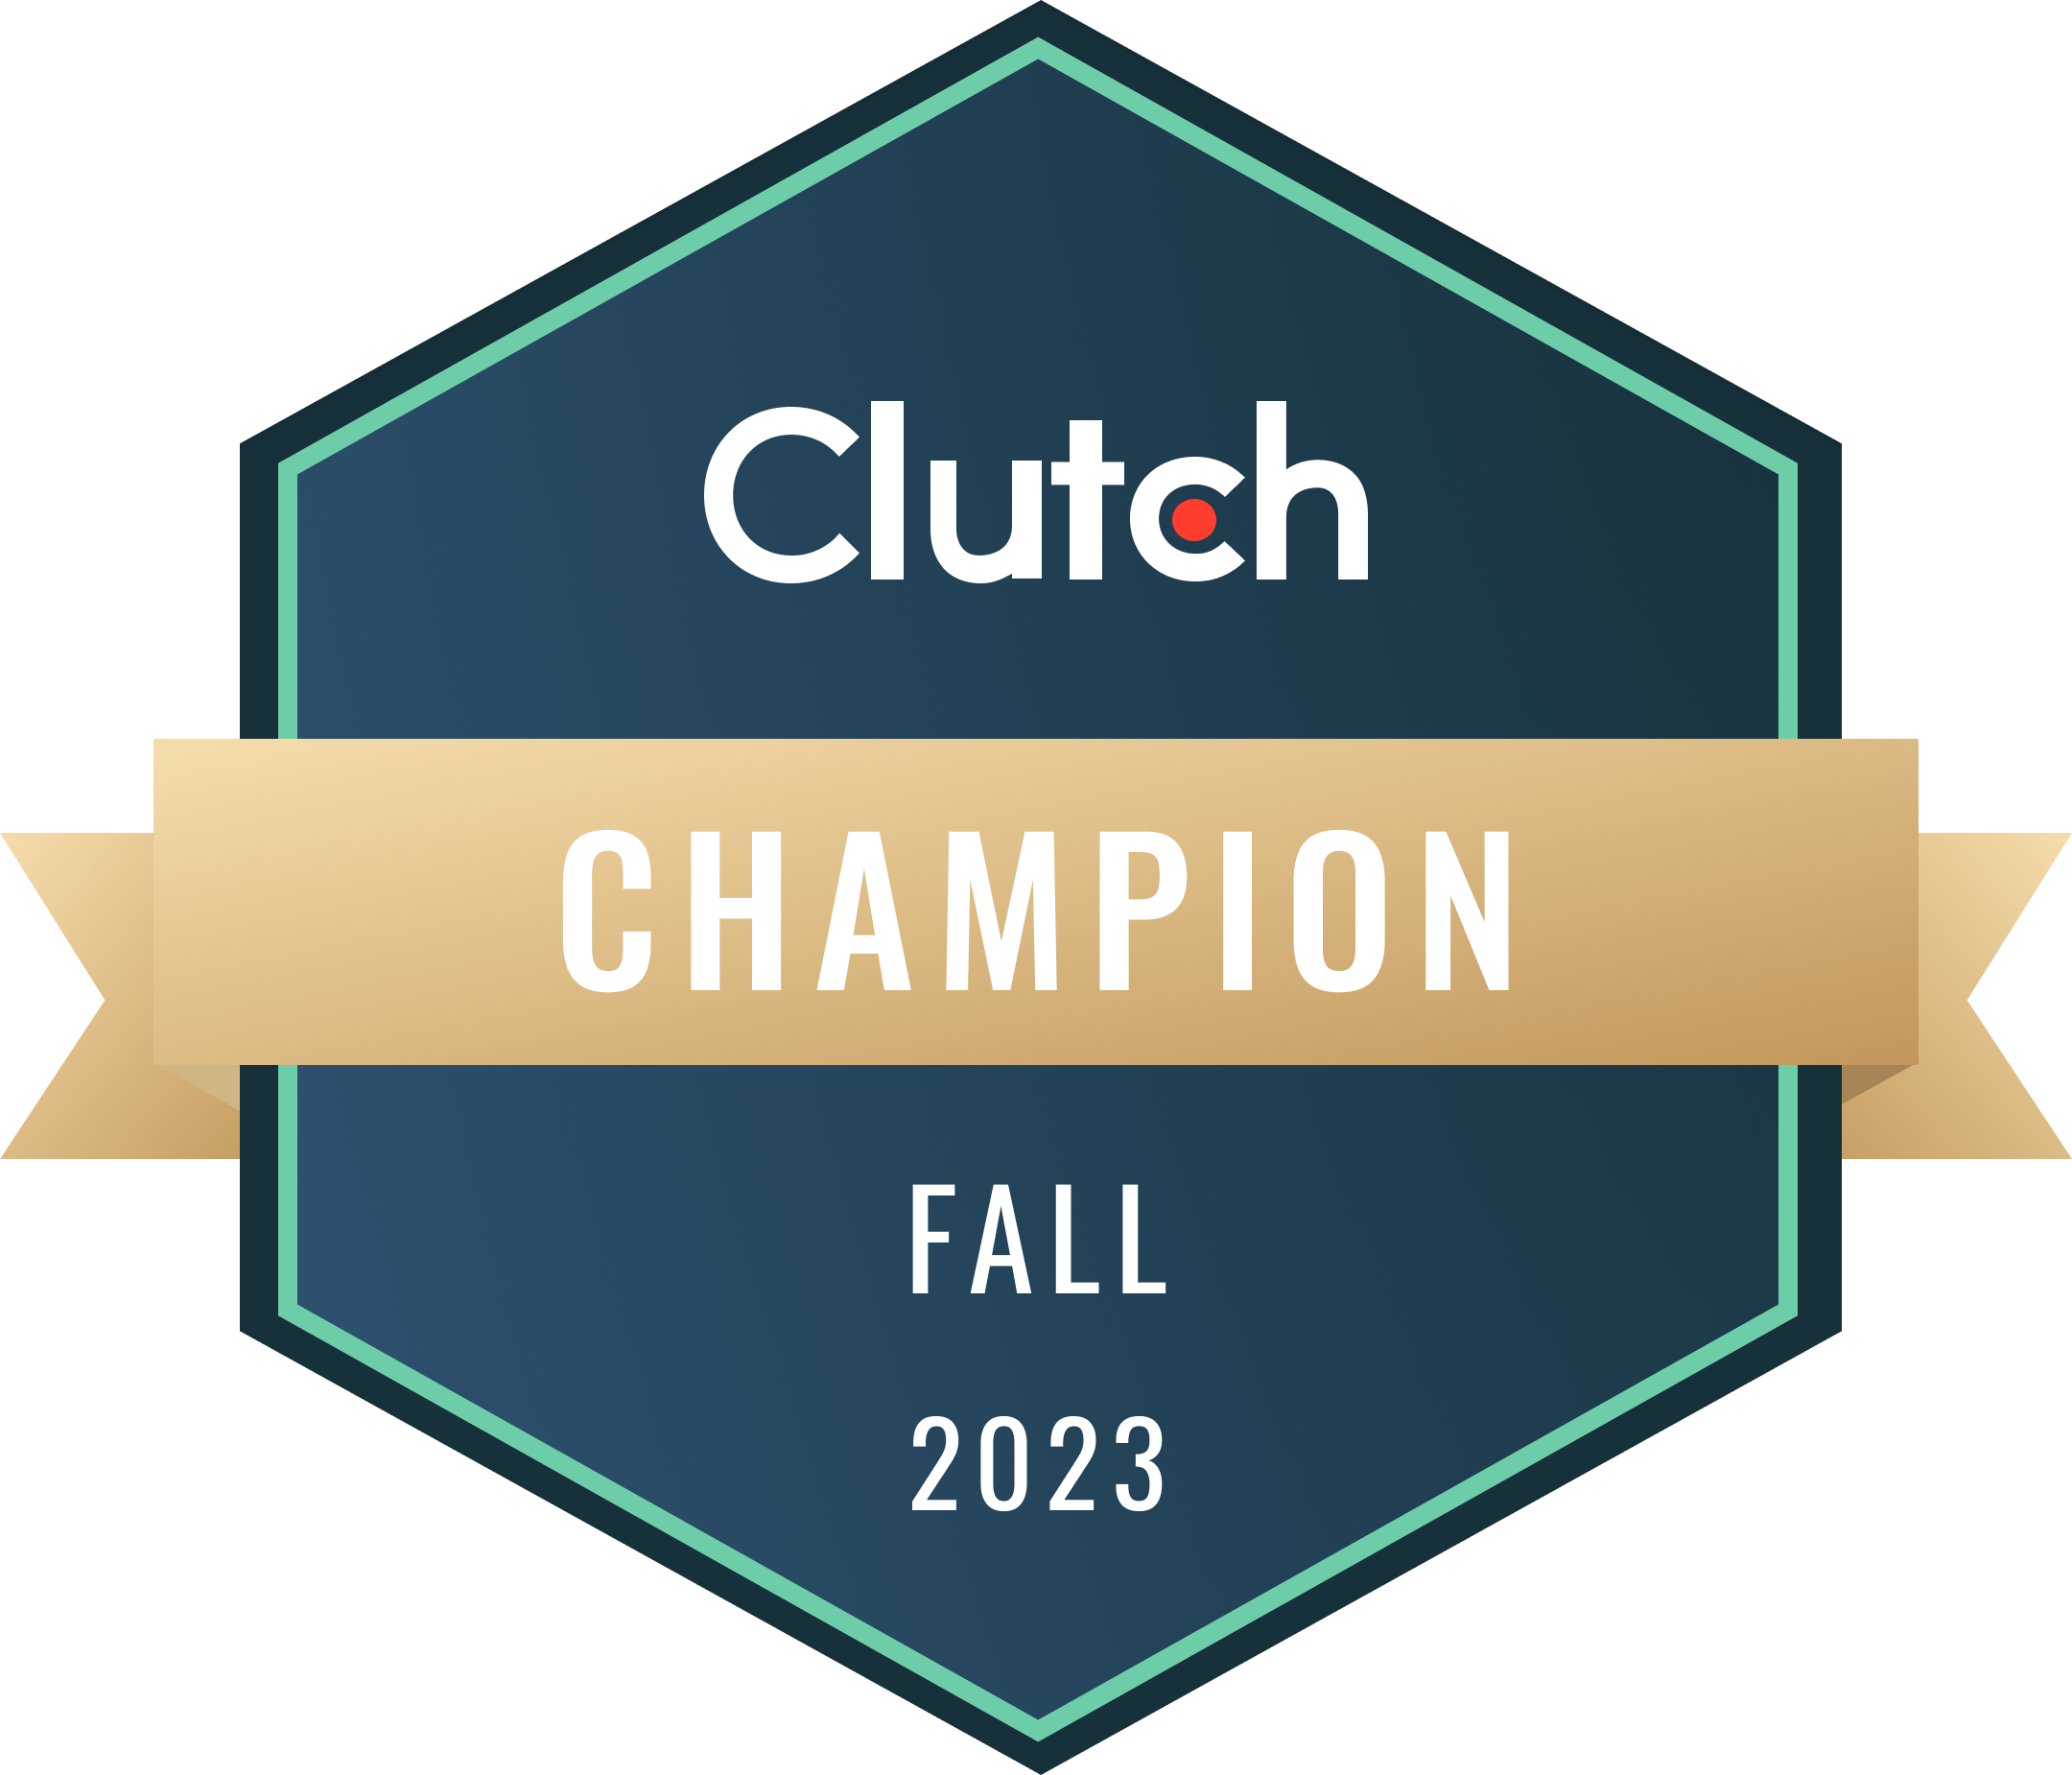 Clutch Champion Fall 2023 IT Services